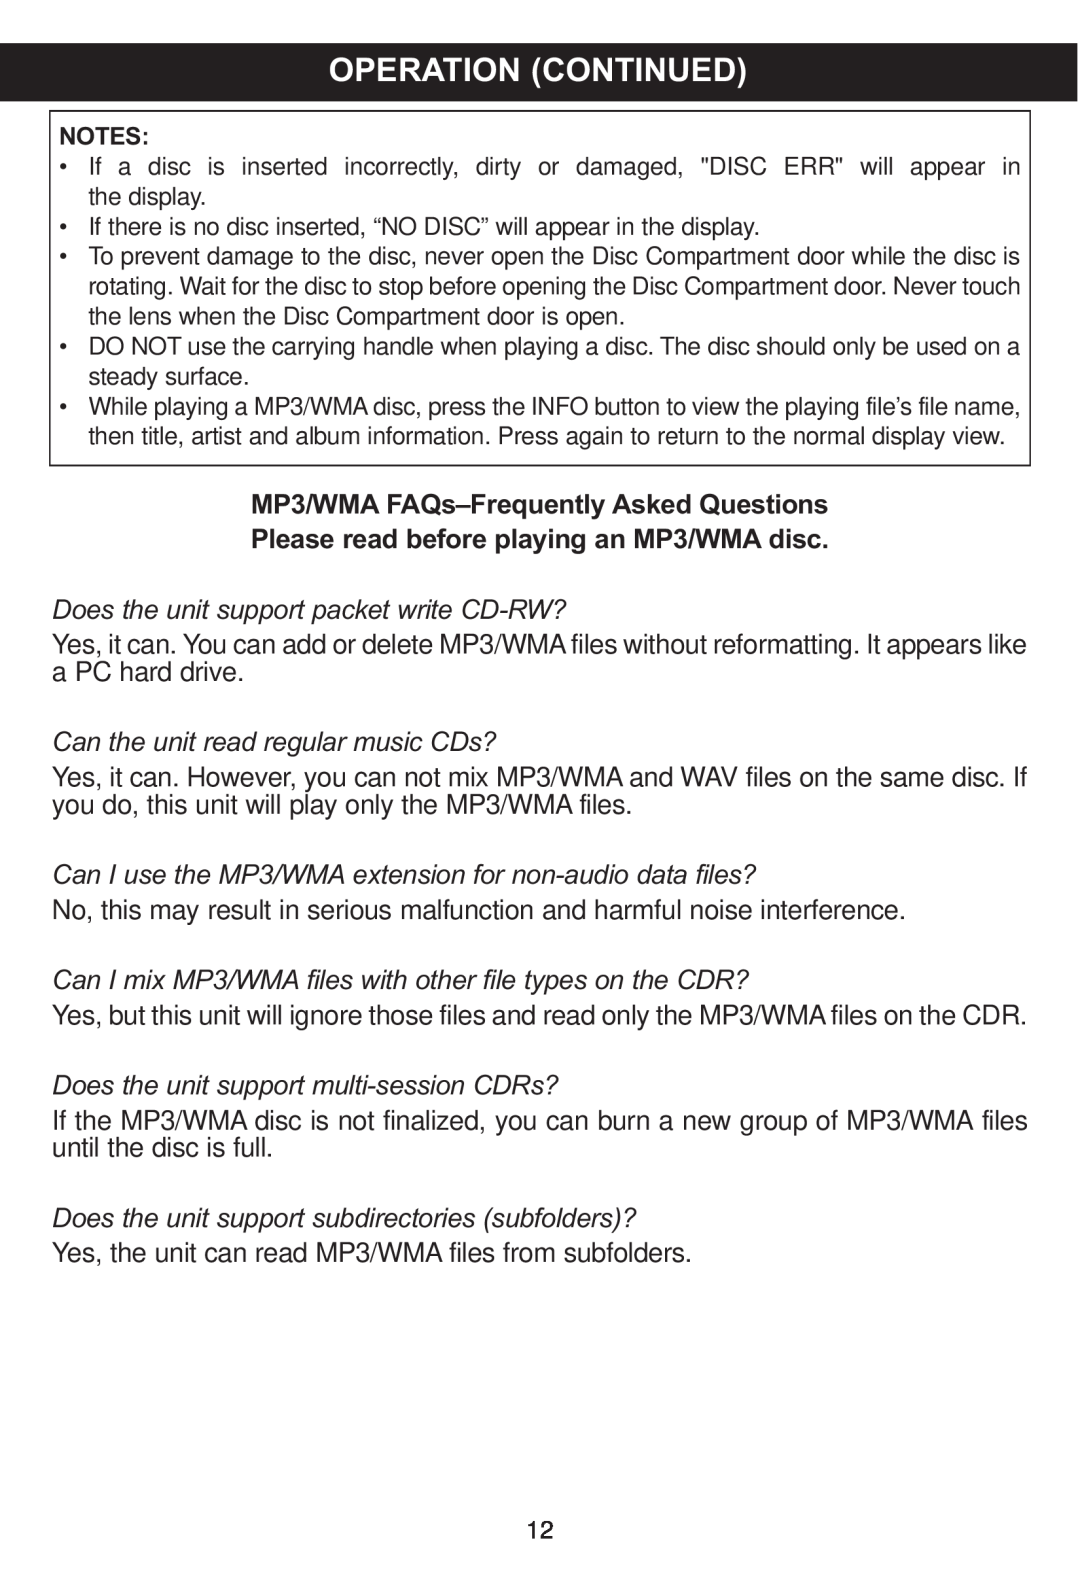 Memorex MP4047 Operation Continued, MP3/WMA FAQs-FrequentlyAsked Questions, Please read before playing an MP3/WMA disc 